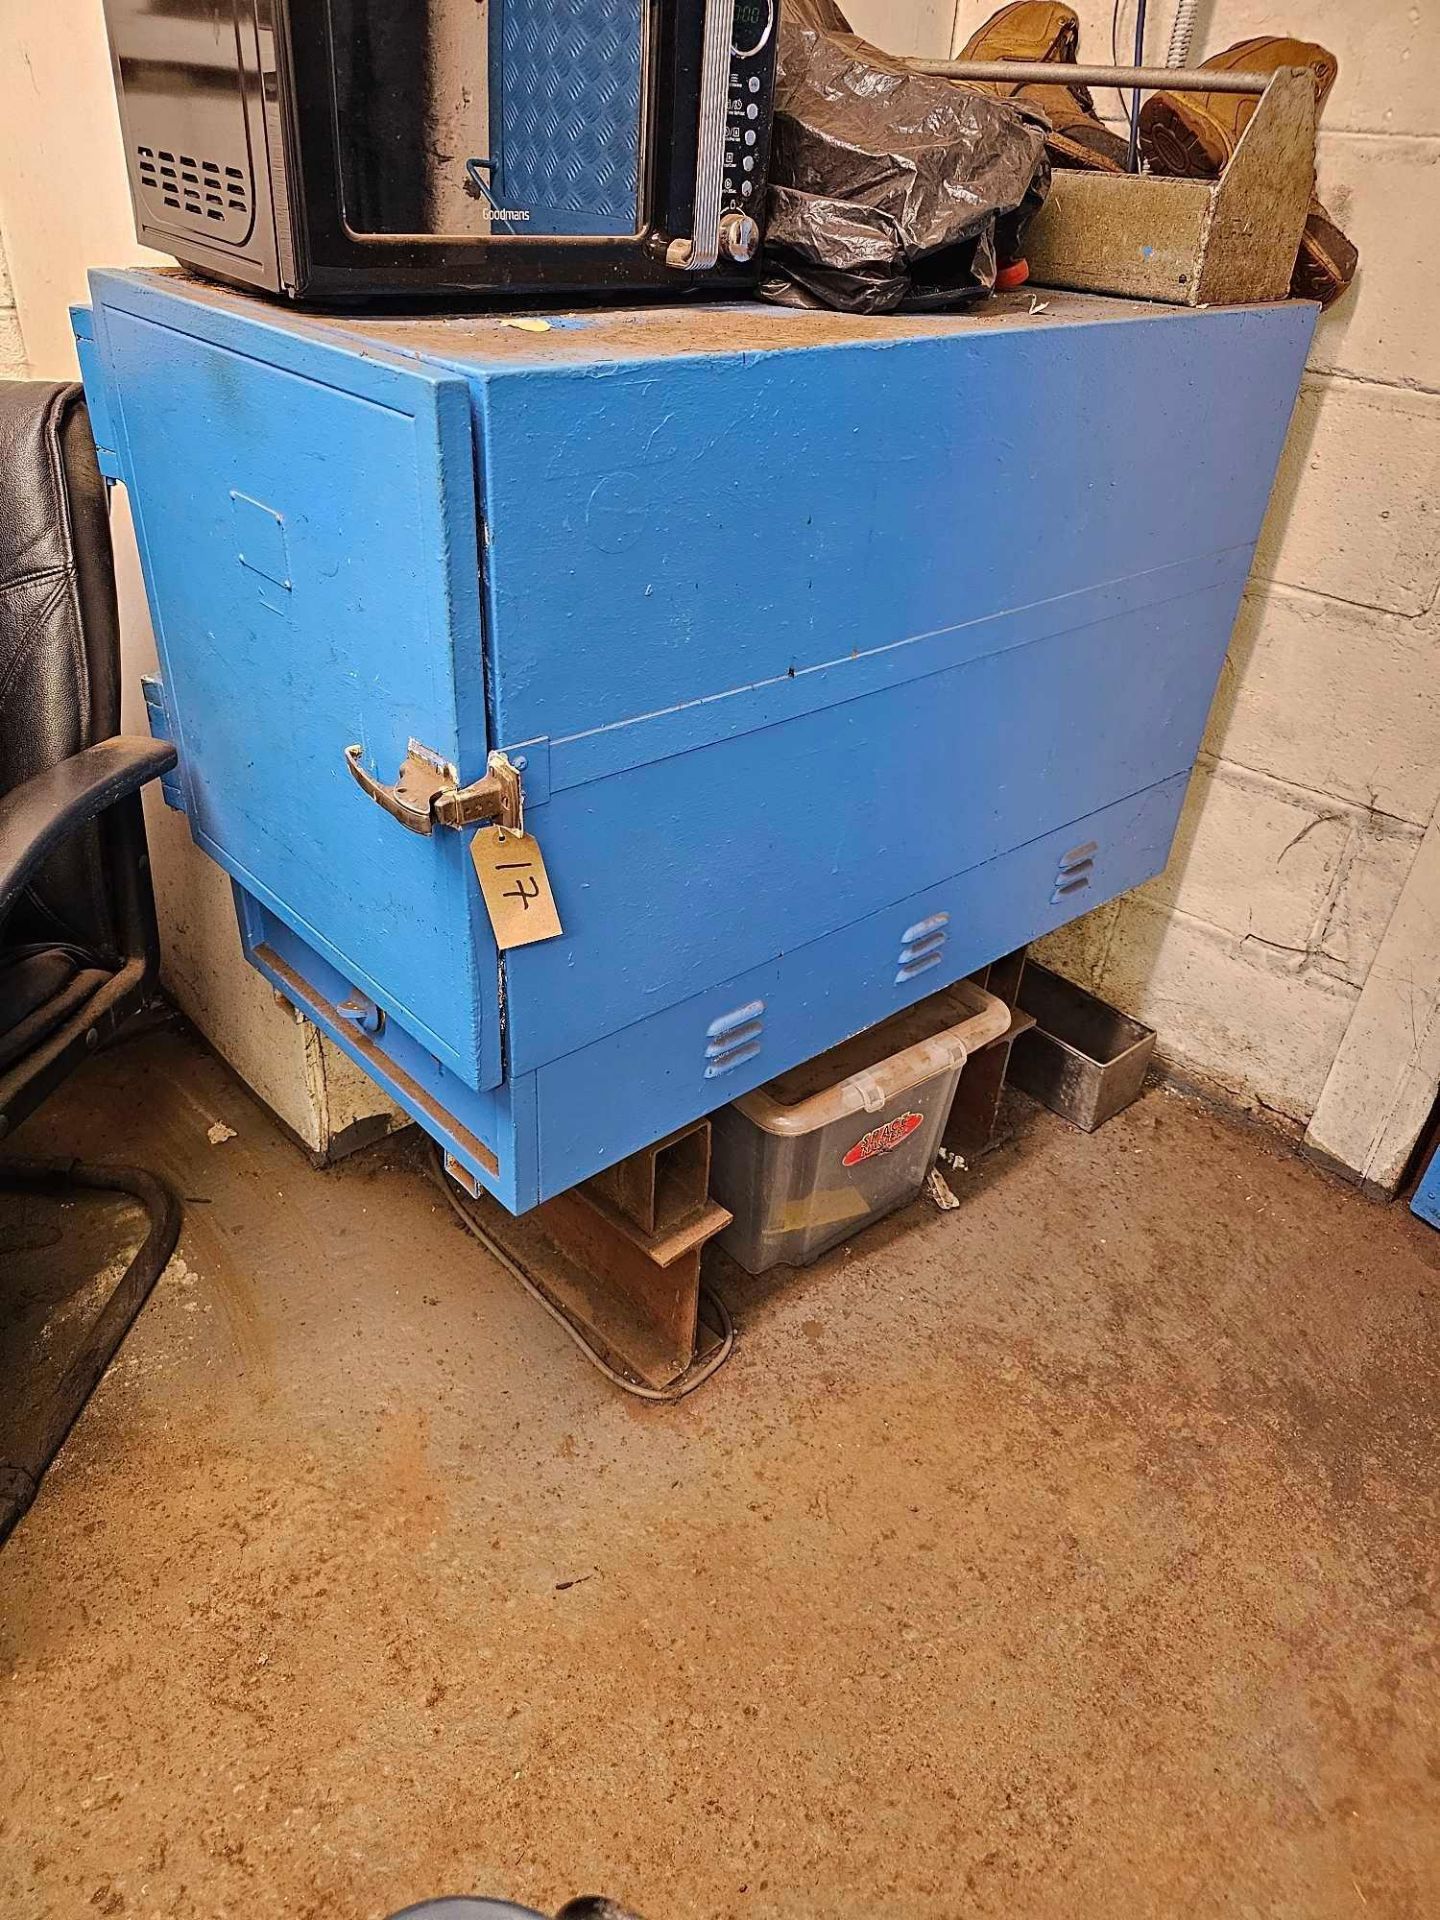 Welding Rod Oven Cabinet Size 106 x 54 x 69cm Complete With Contents - Image 2 of 4